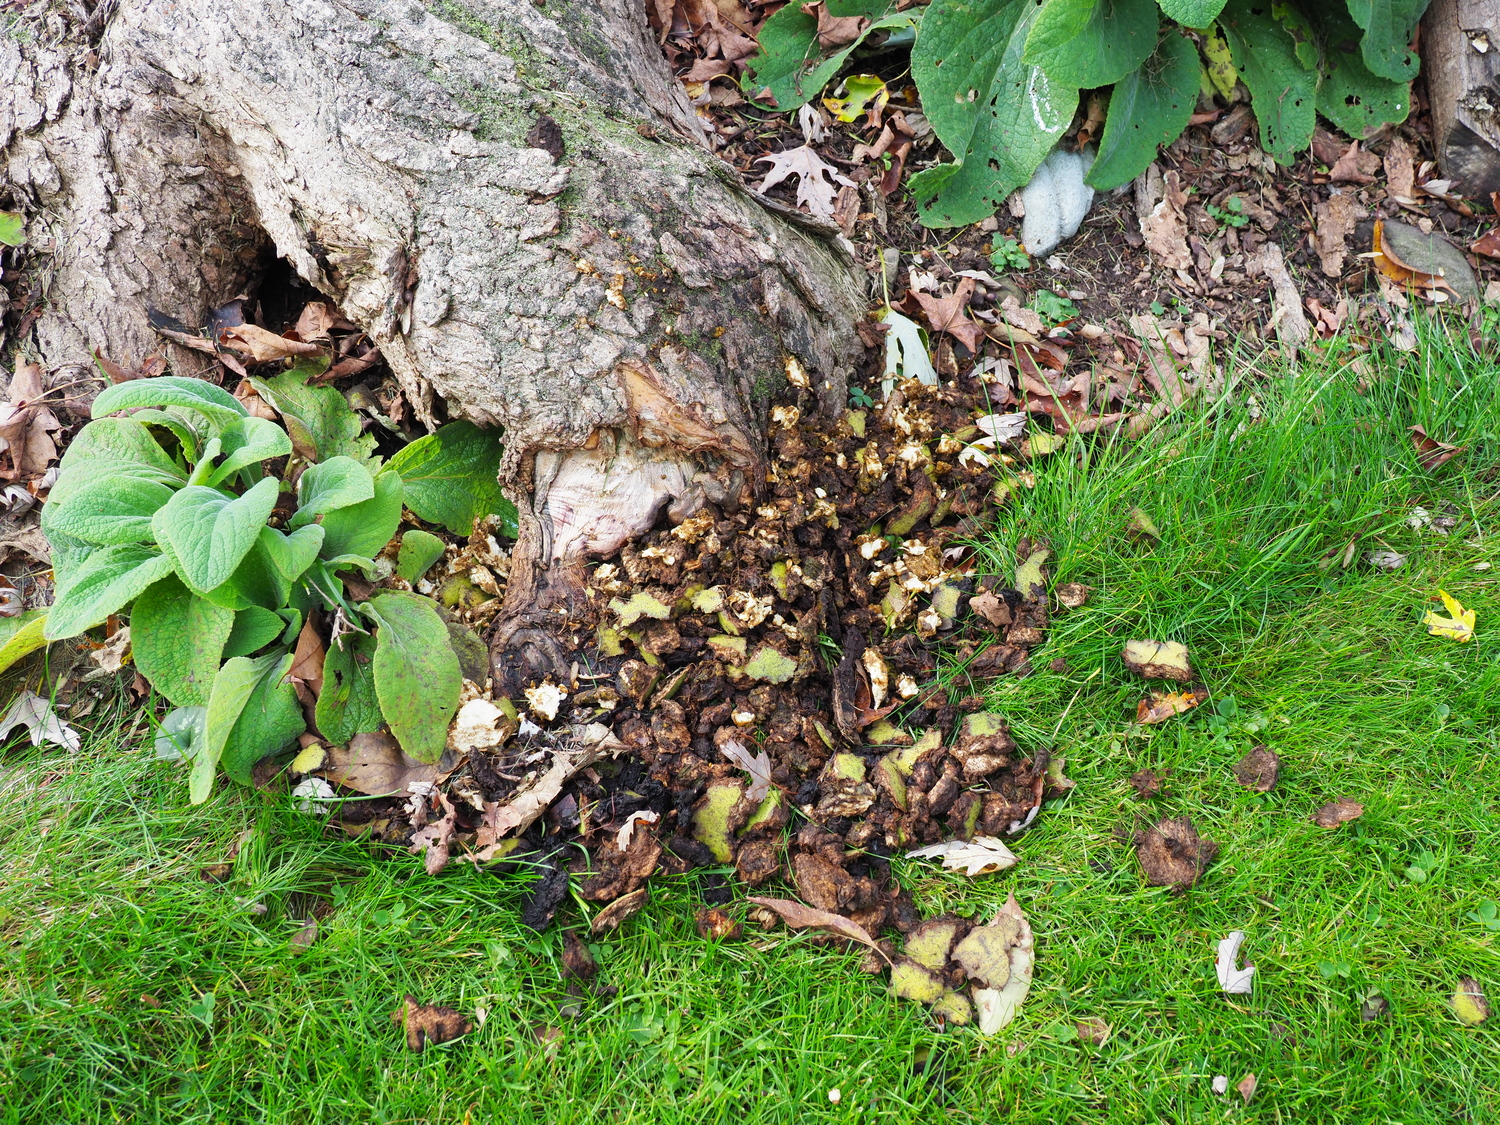 A gray squirrel sat at the base of this maple tree stripping off the black walnut husk shell leaving behind a deposit of juglone rich debris? Will the grass survive? Will the Digitalis to the left come back next year? ANDREW MESSINGER